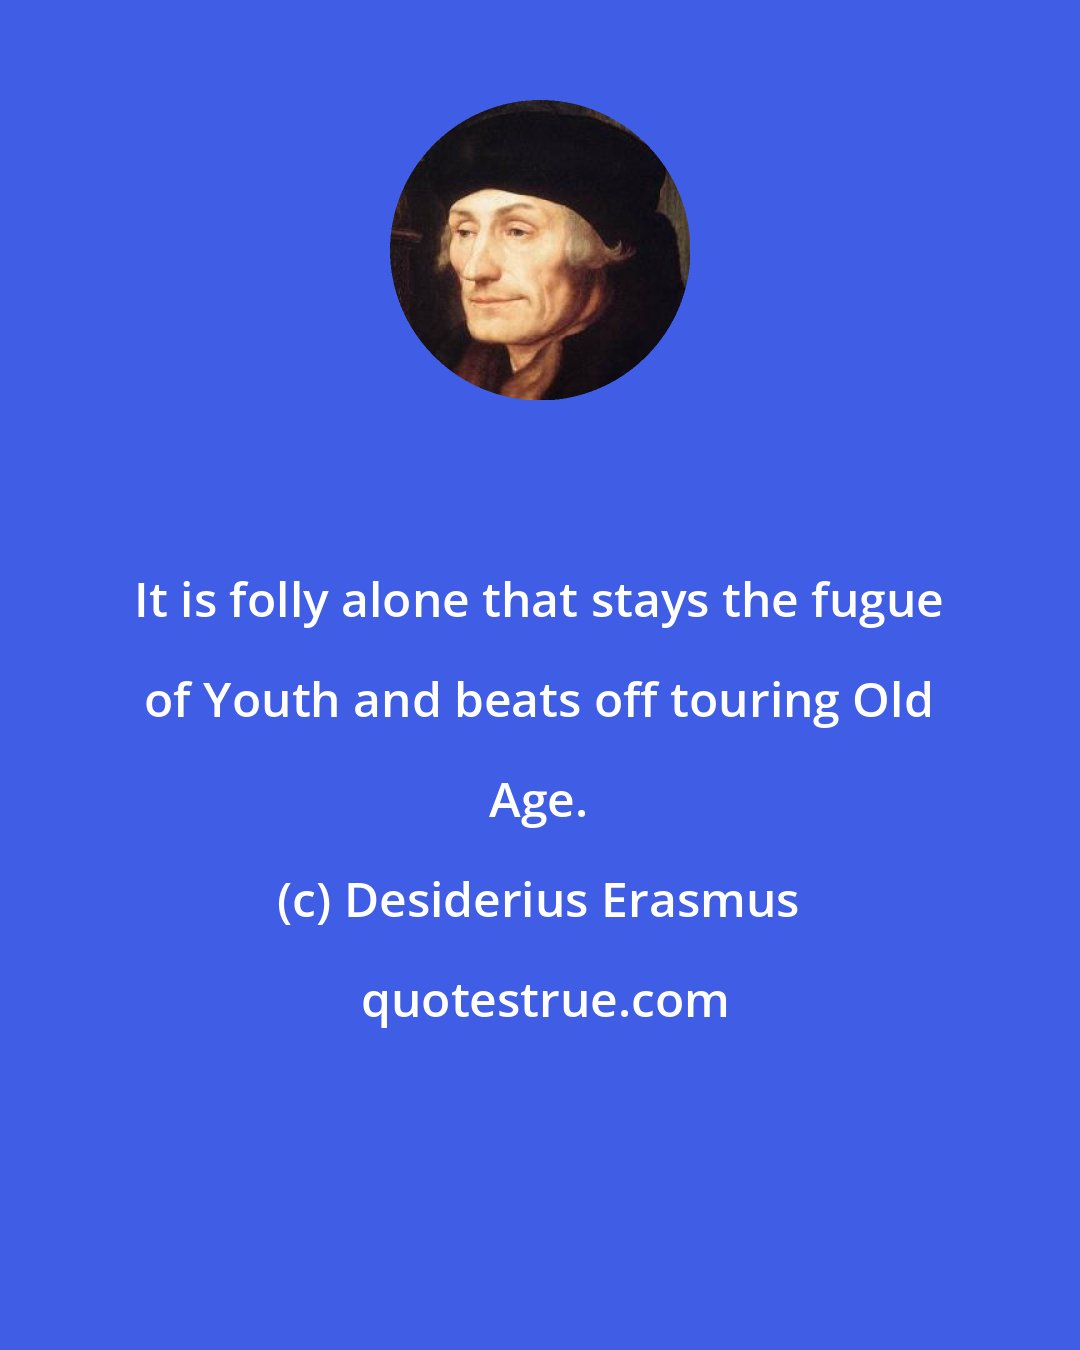 Desiderius Erasmus: It is folly alone that stays the fugue of Youth and beats off touring Old Age.